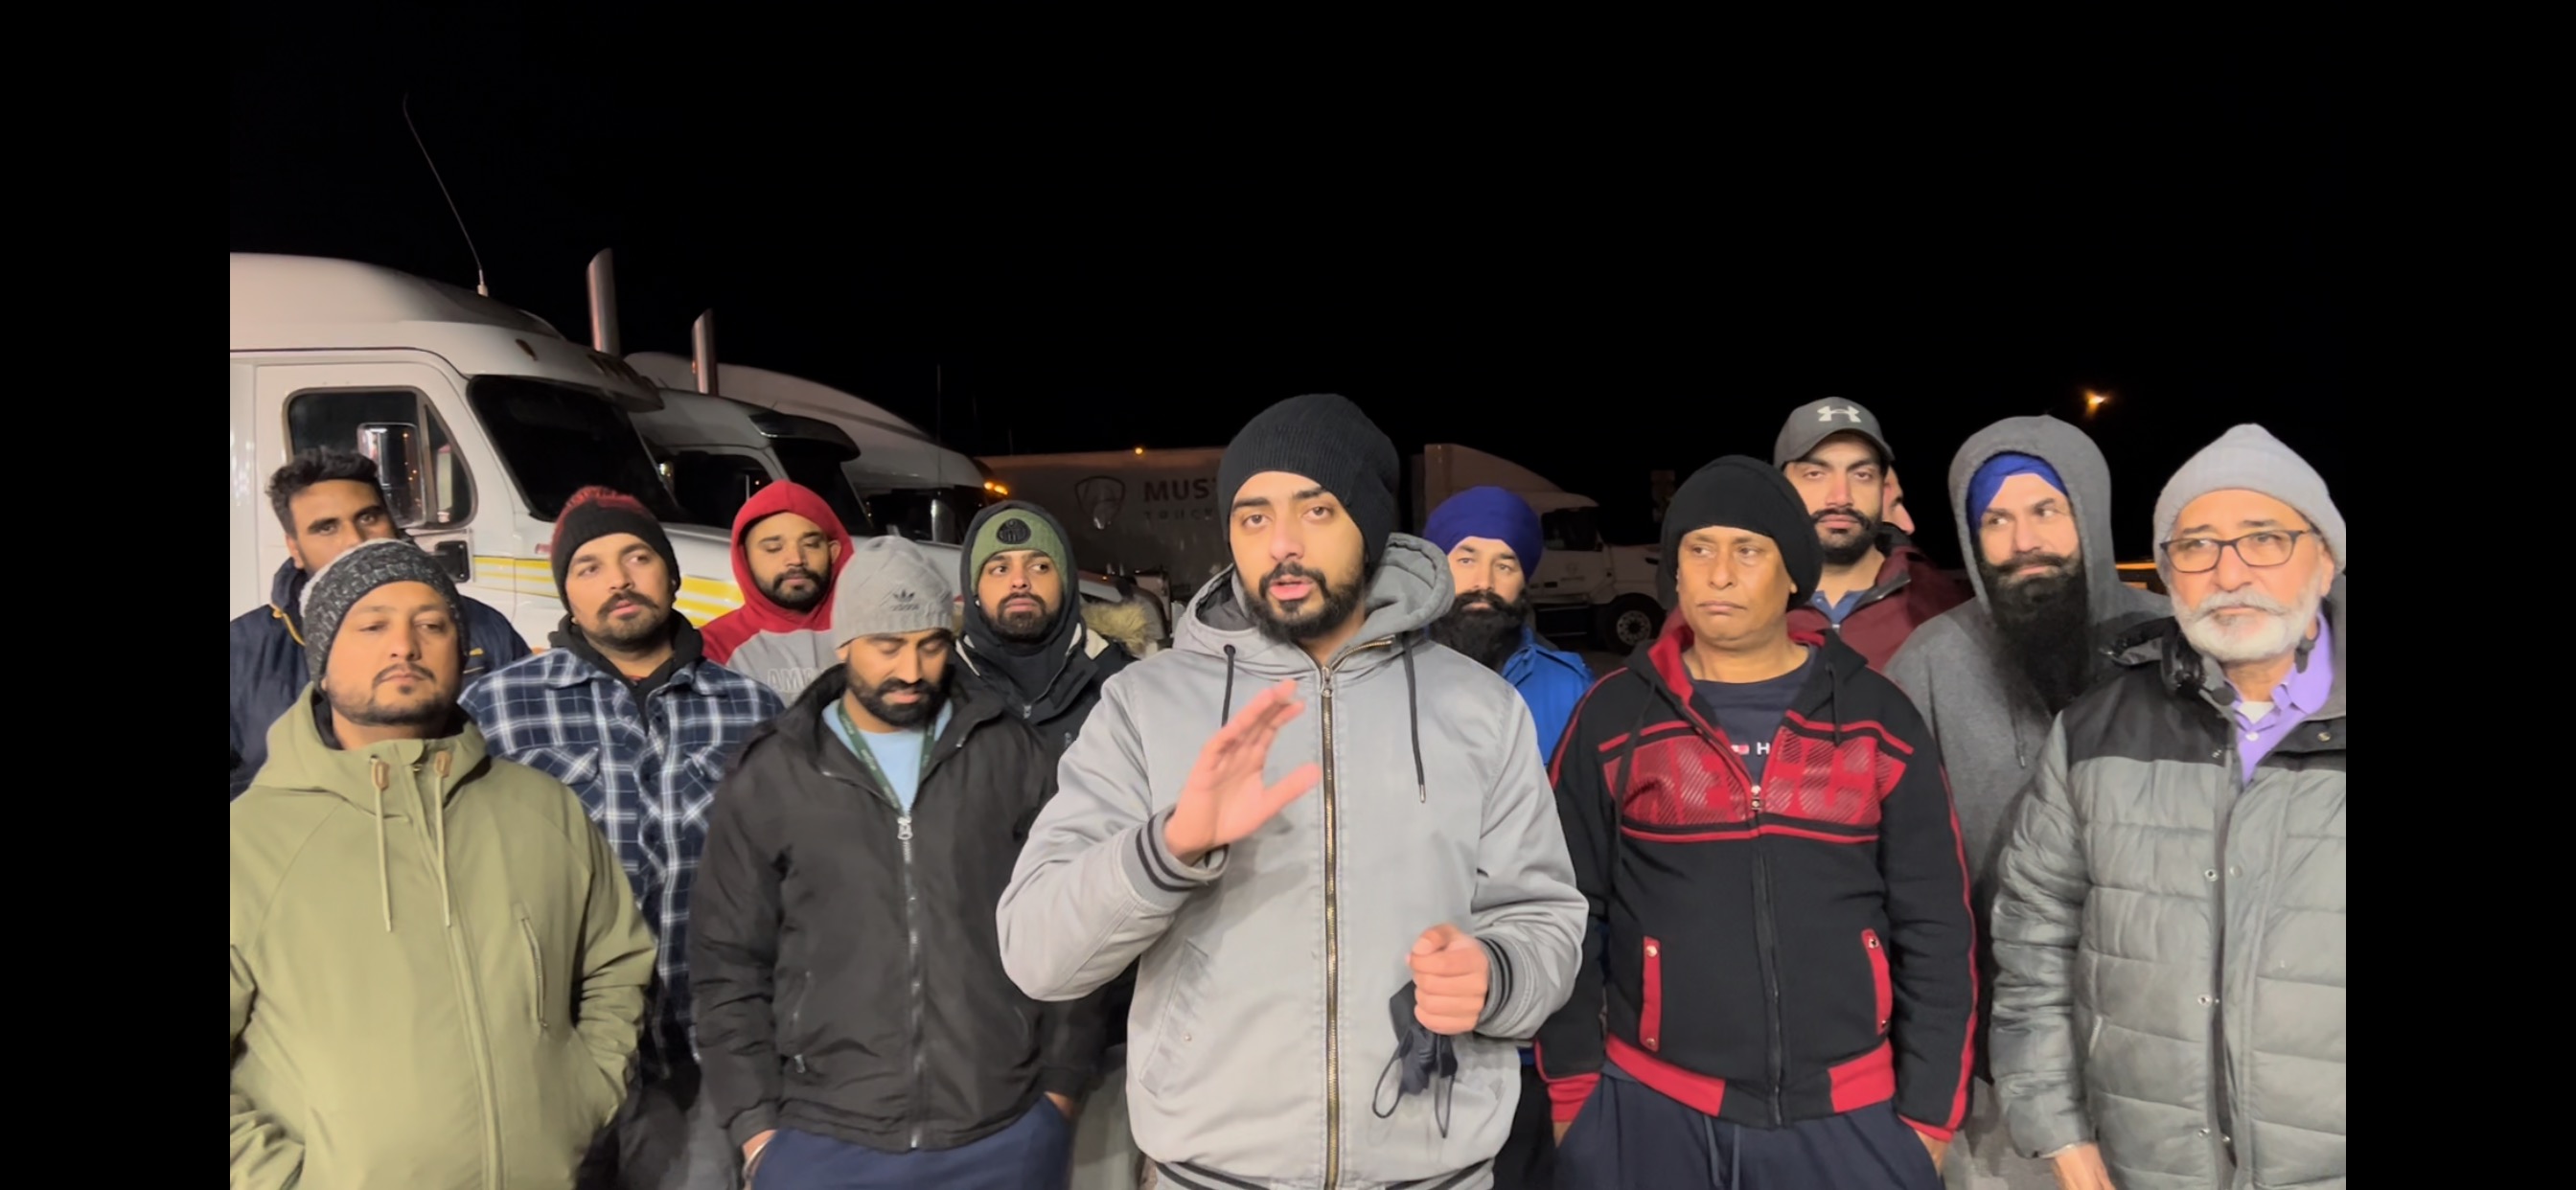 Lovepreet Singh in the middle voicing concerns about anti-vax convoy on Facebook